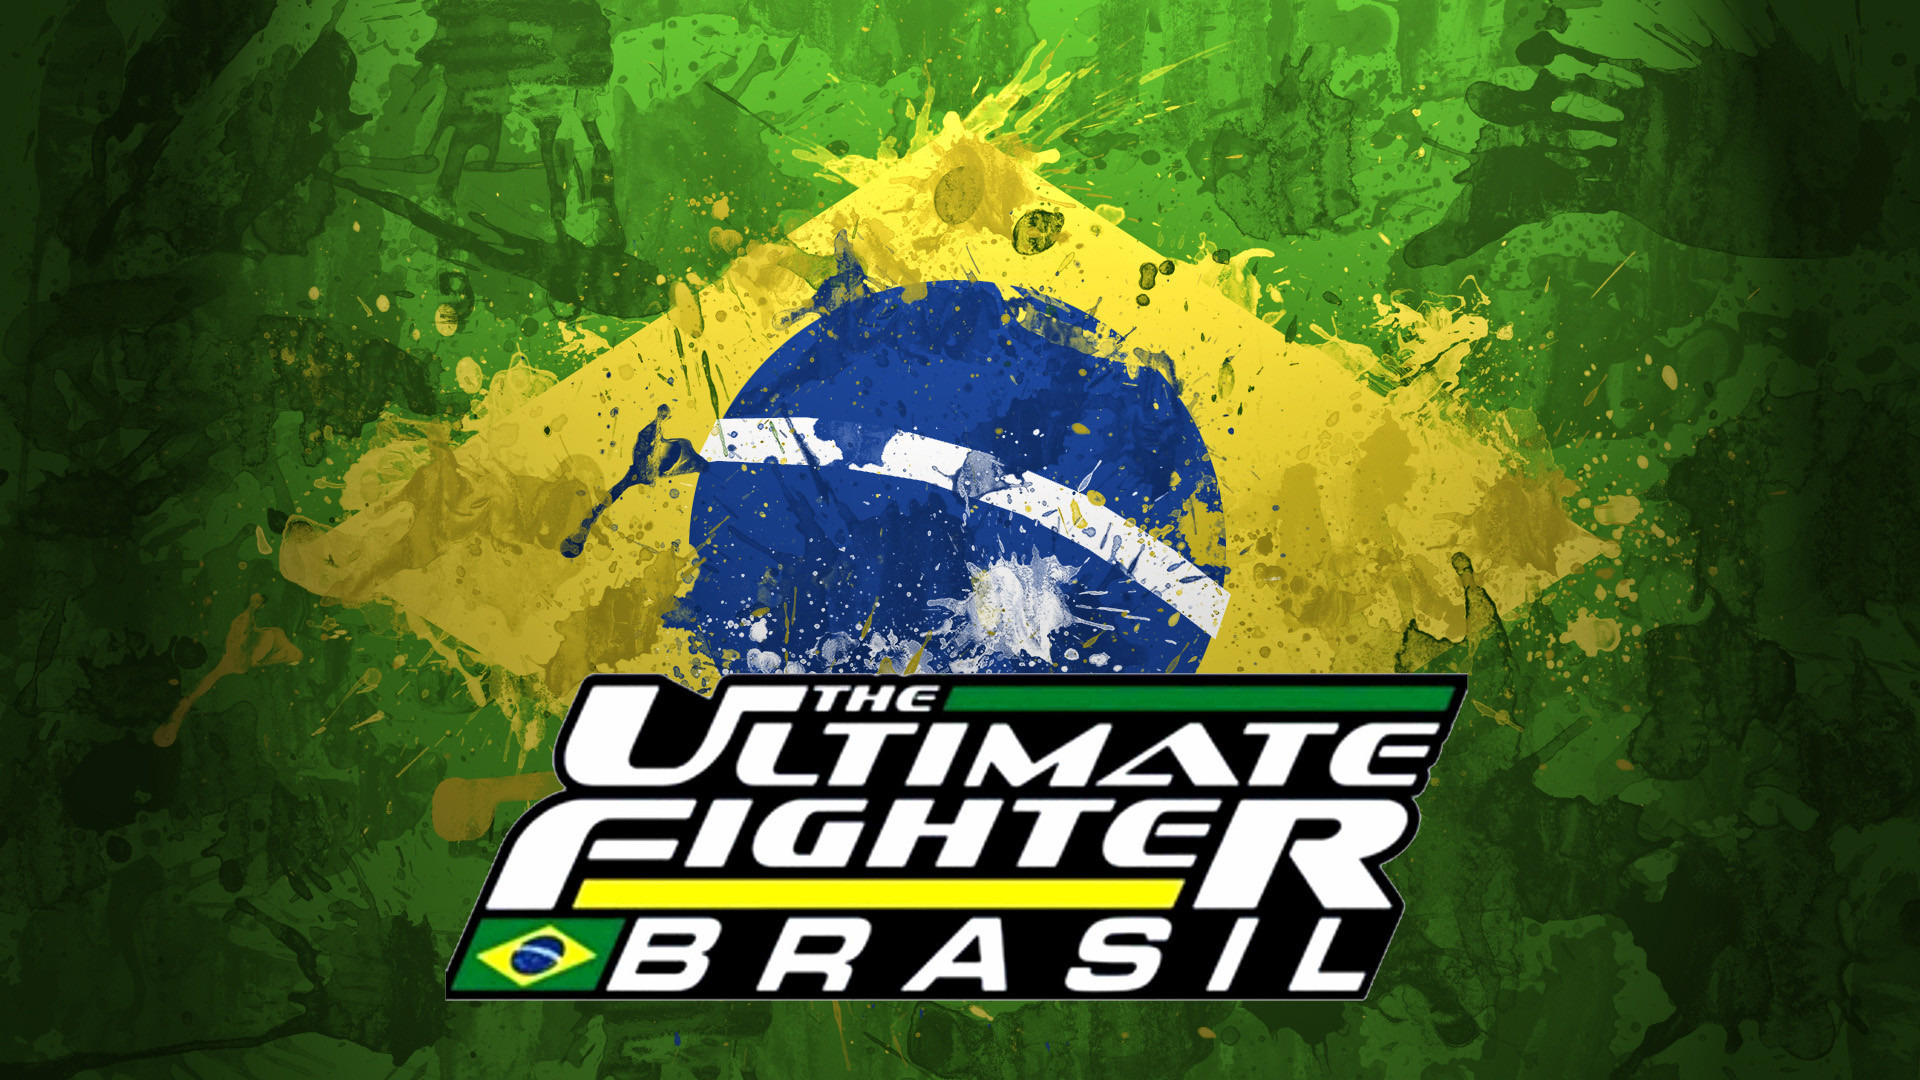 Show The Ultimate Fighter (BR)